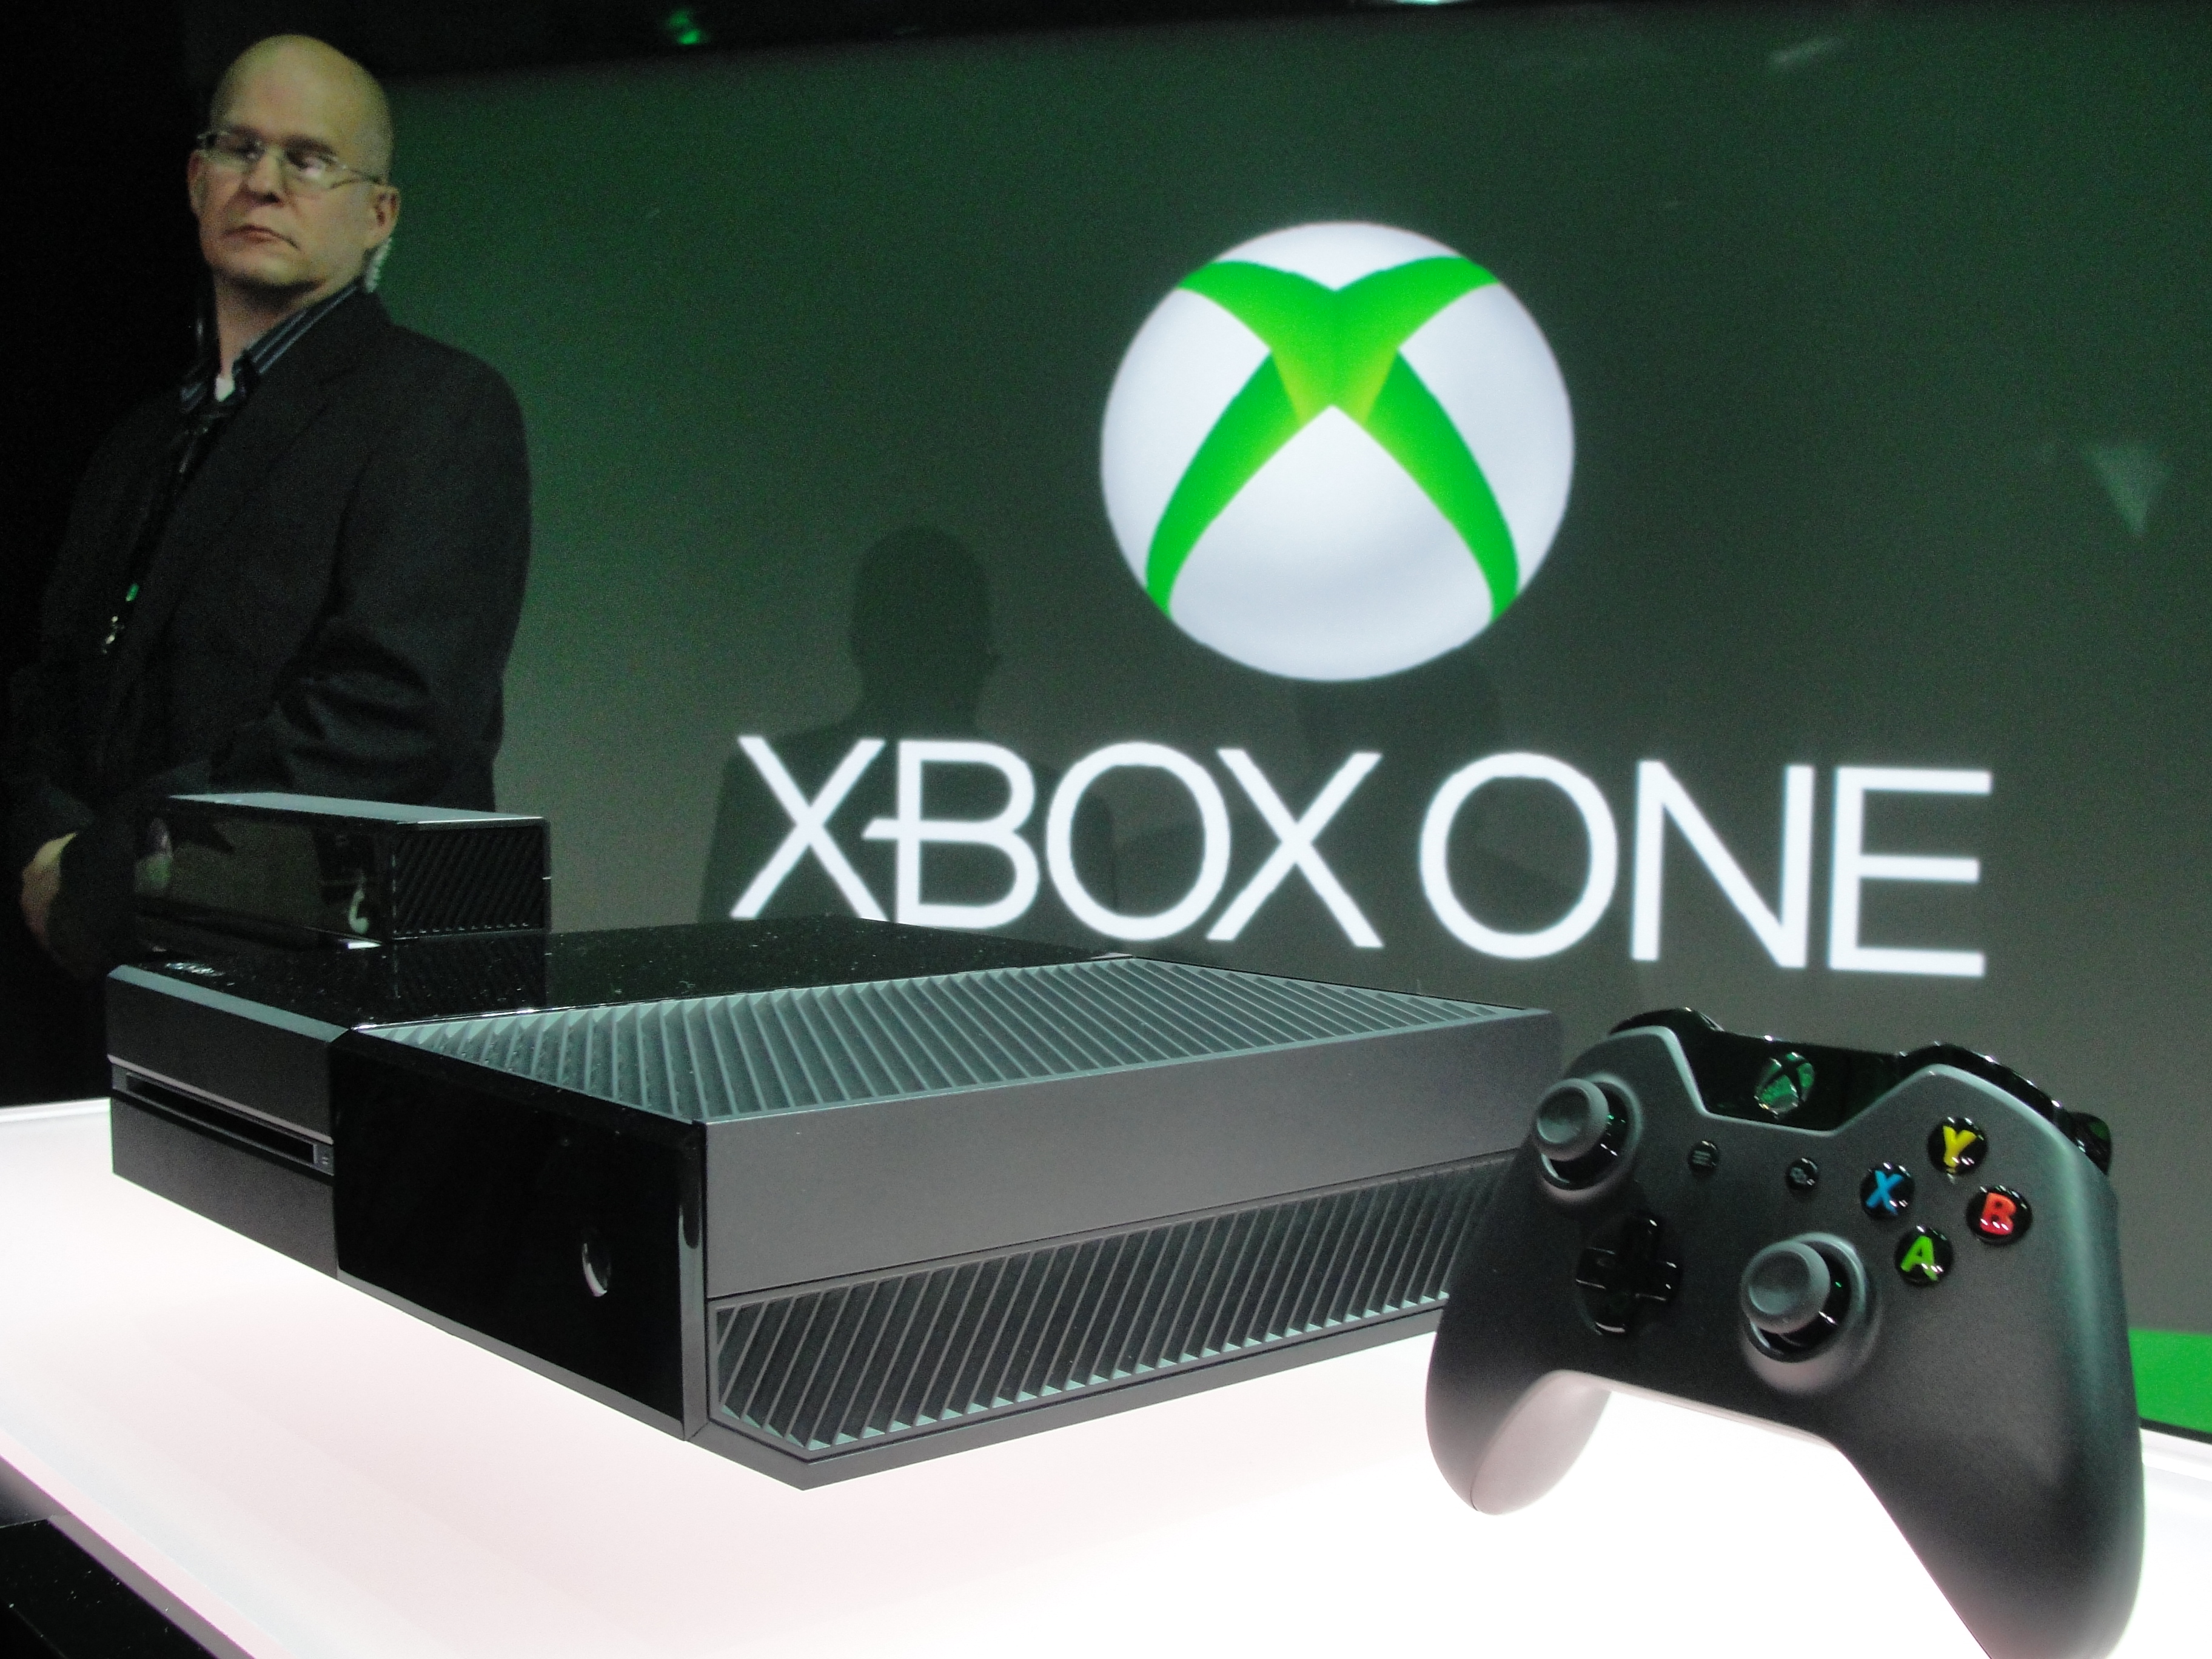 A member of the Microsoft security team watches over the newly unveiled Xbox One videogame console at the Microsoft campus in Redmond, Washington, on May 21, 2013. (AFP&mdash;AFP/Getty Images)